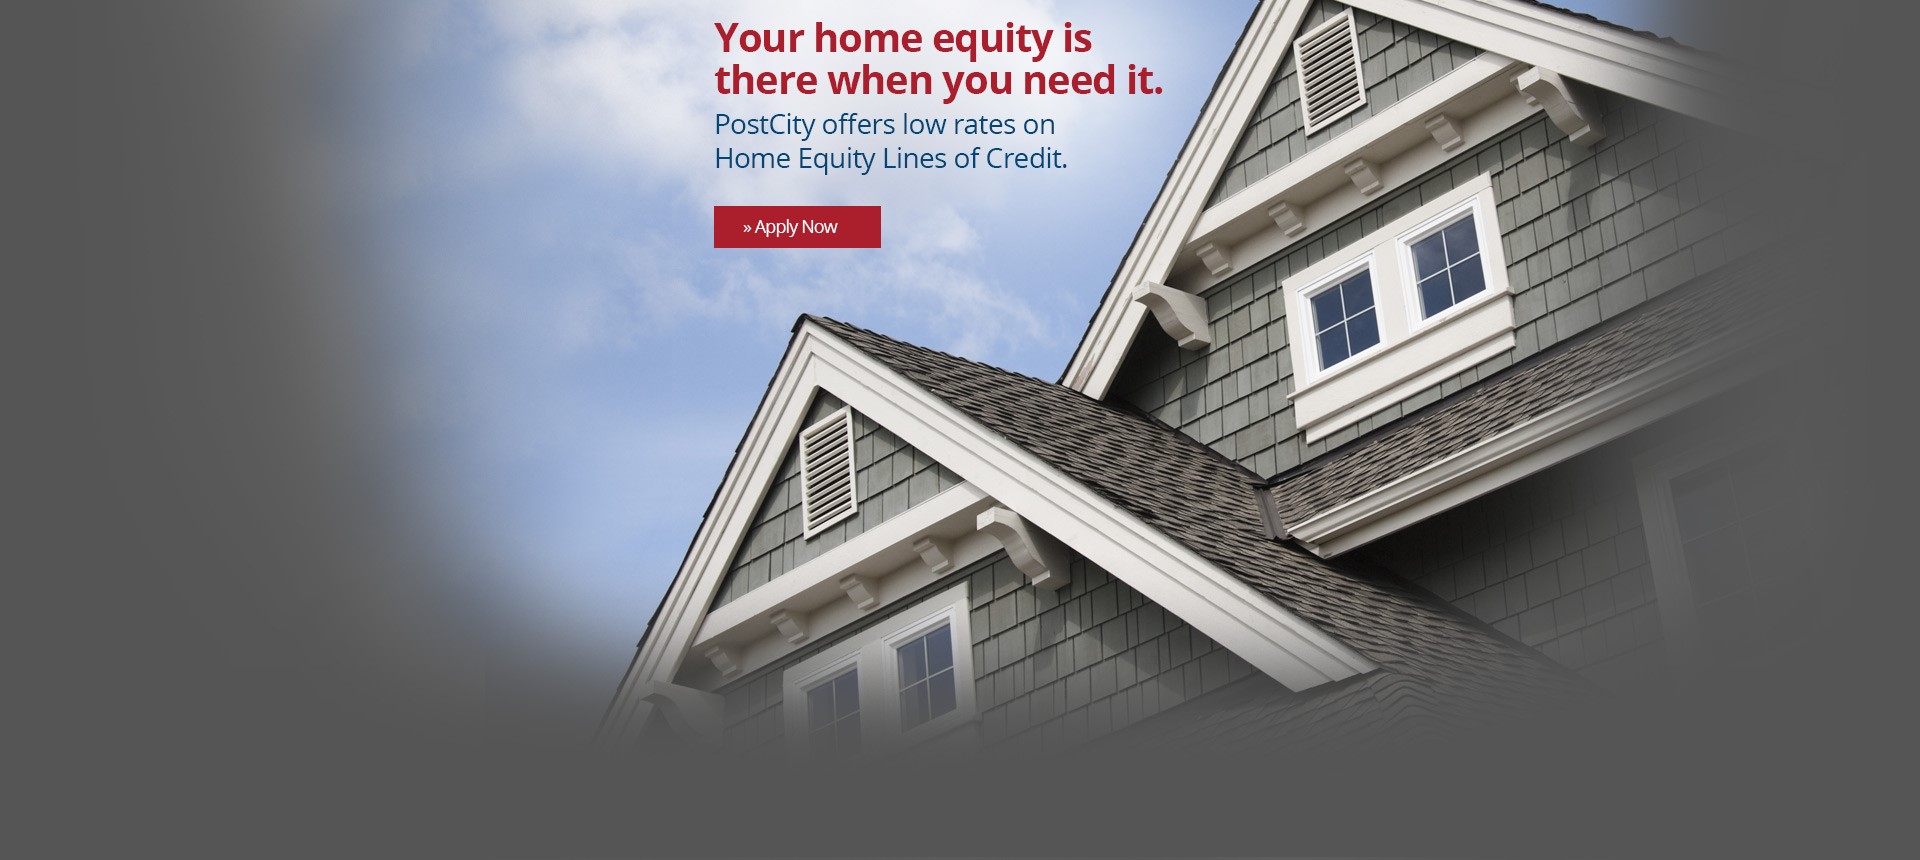 We have Home Equity Loans